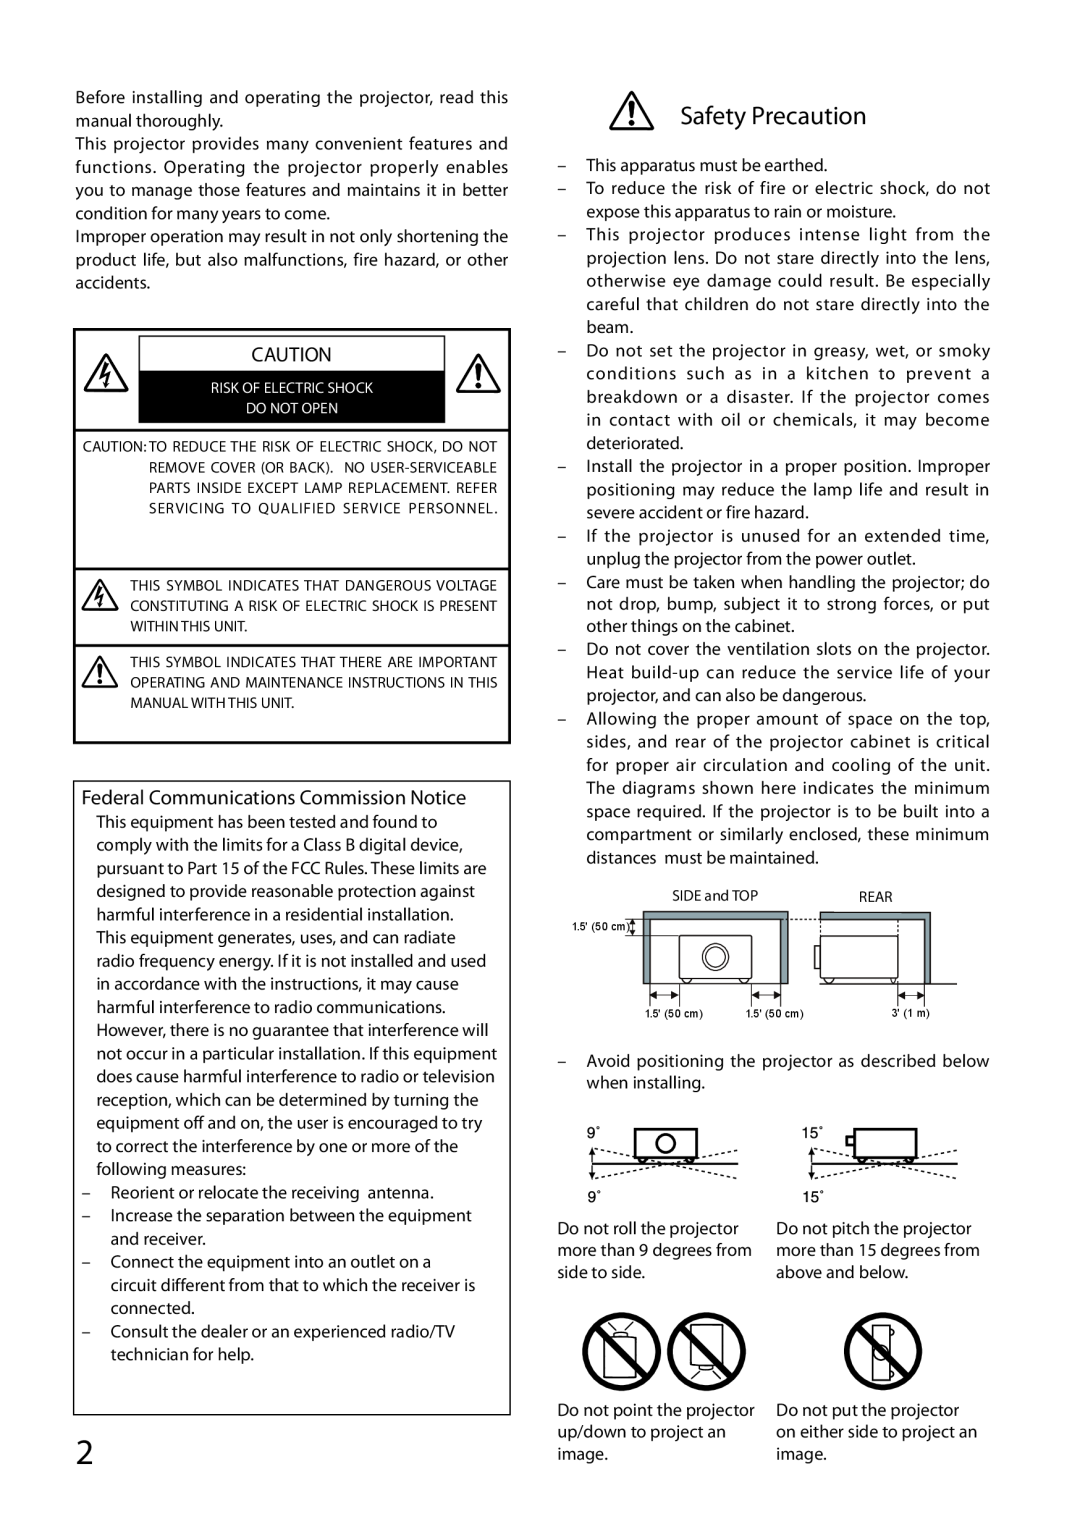 Sanyo PDG-DWL100 owner manual Safety Precaution, Federal Communications Commission Notice 